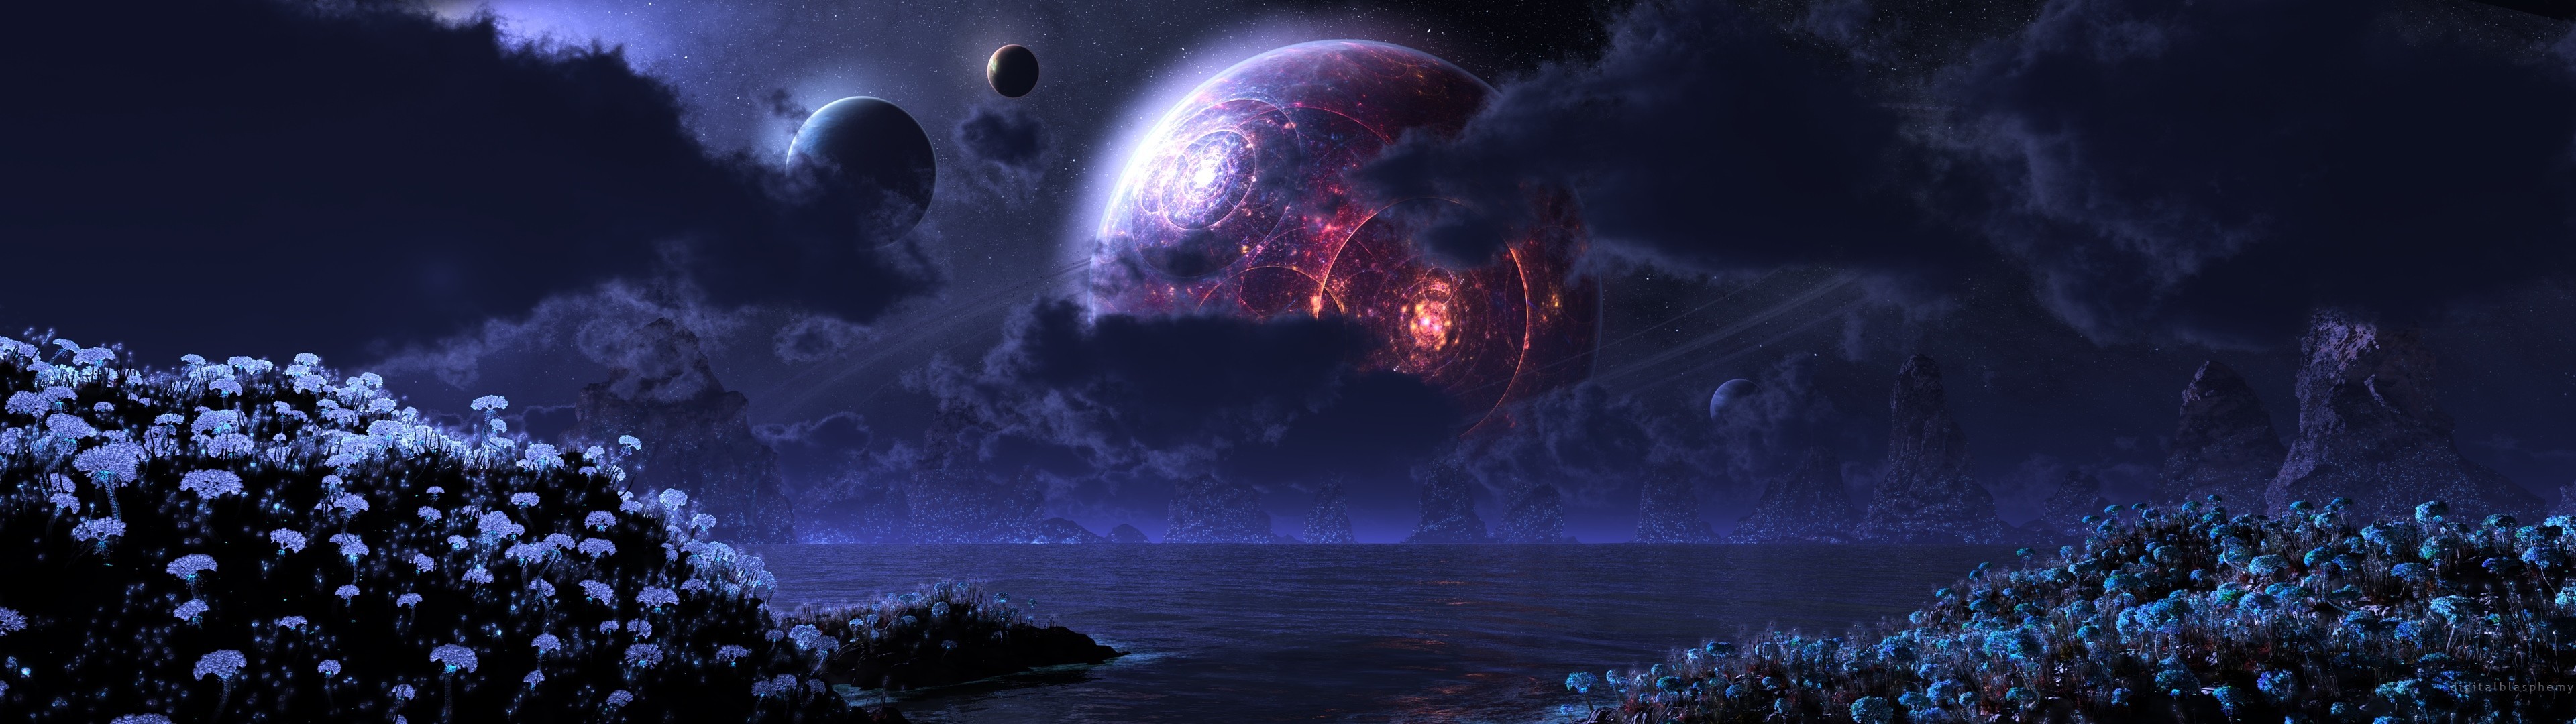 3840x1080 1920x1200 Science Fiction Wallpapers